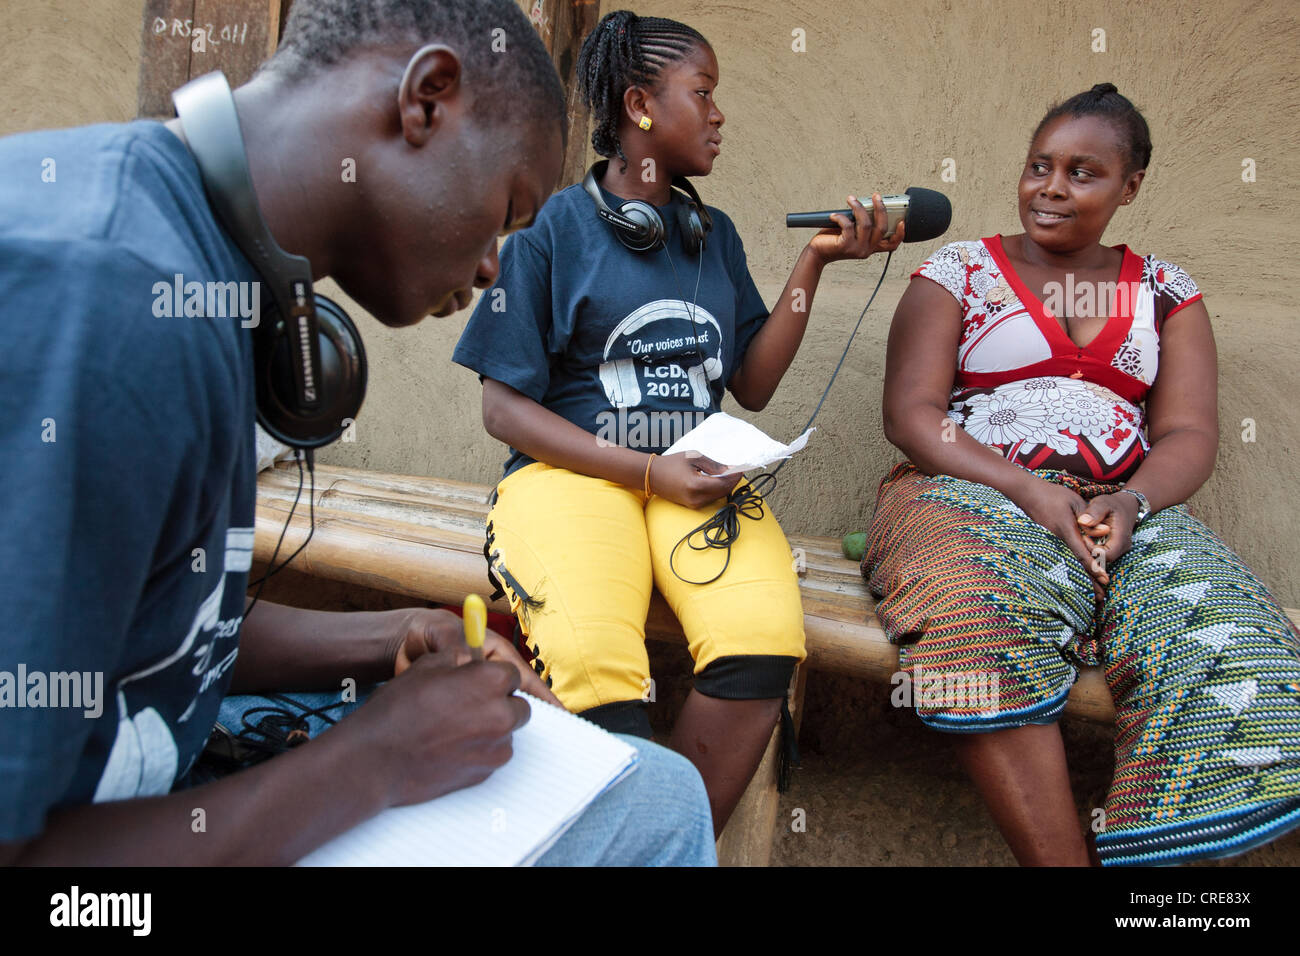 Satta Fahnbulleh, 17, interviews a woman while Karn B. Sherman, 17, takes notes as they work on producing a radio show Stock Photo